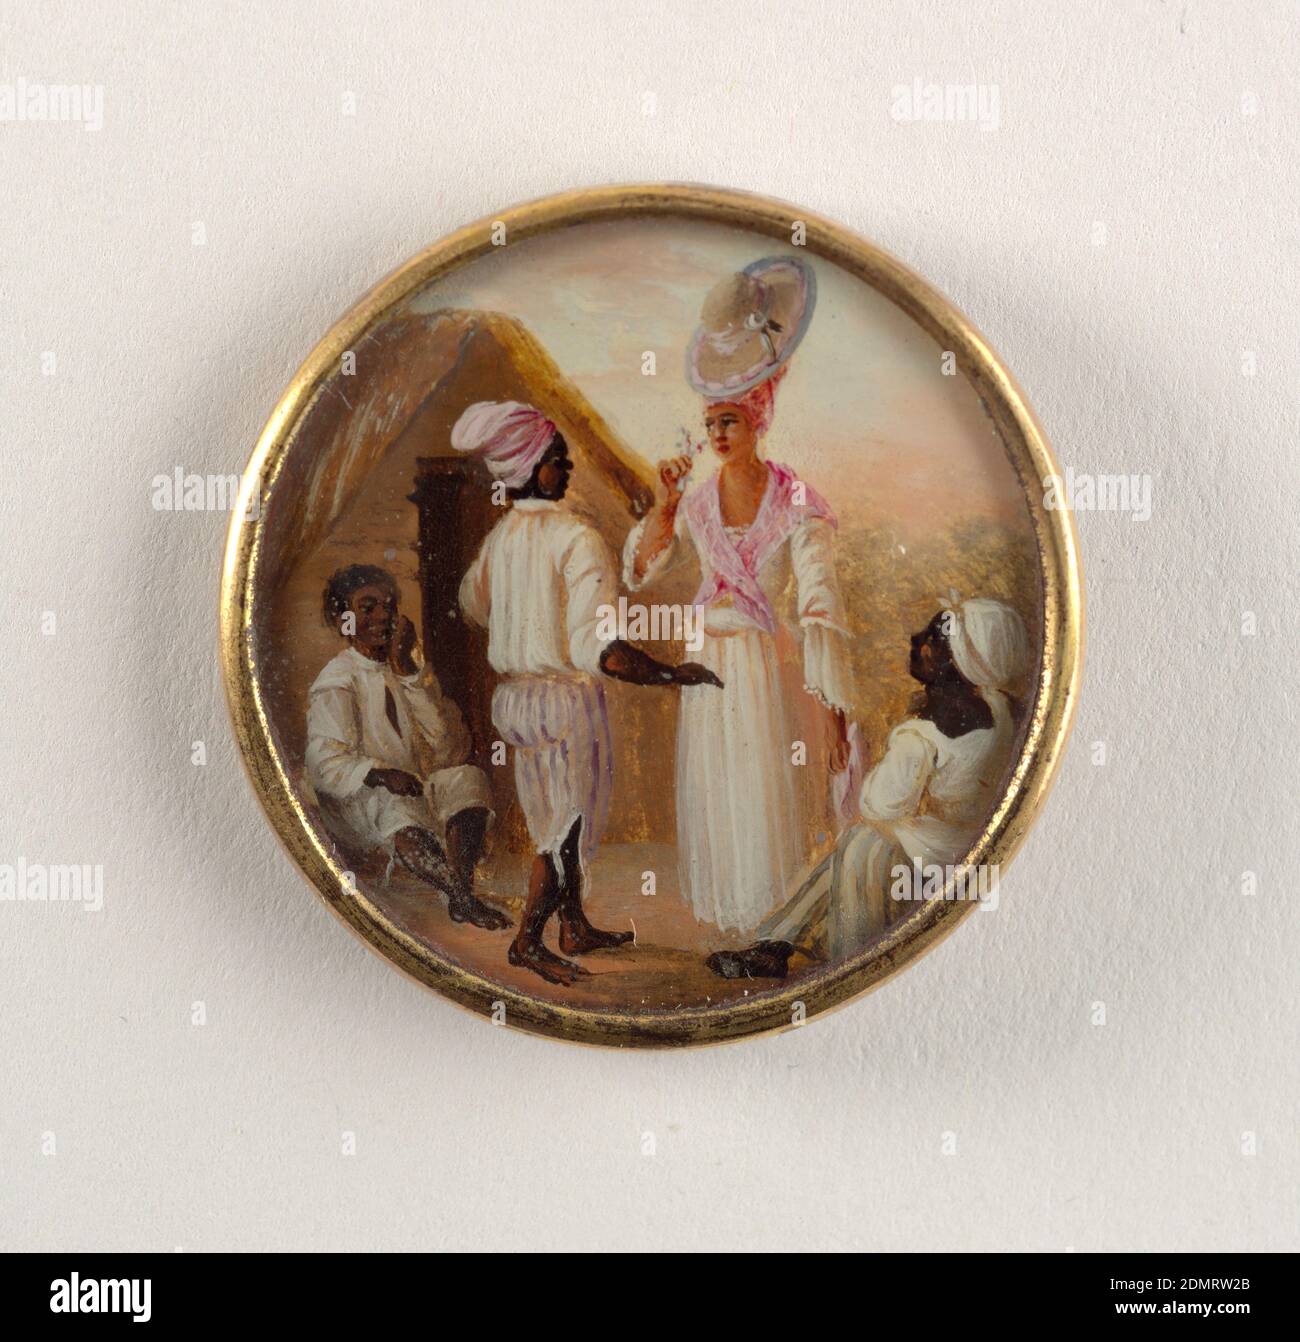 Button, Gouache paint on tin verre fixé, ivory (backing), glass, gilt metal, Button depicting scene of four figures outside before a thatched hut. At center, a man in striped pants and white shirt faces a woman in a dress with a pink scarf who smells a flower. Seated man and woman on either side stare up at central couple., late 18th century, costume & accessories, Decorative Arts, Button Stock Photo